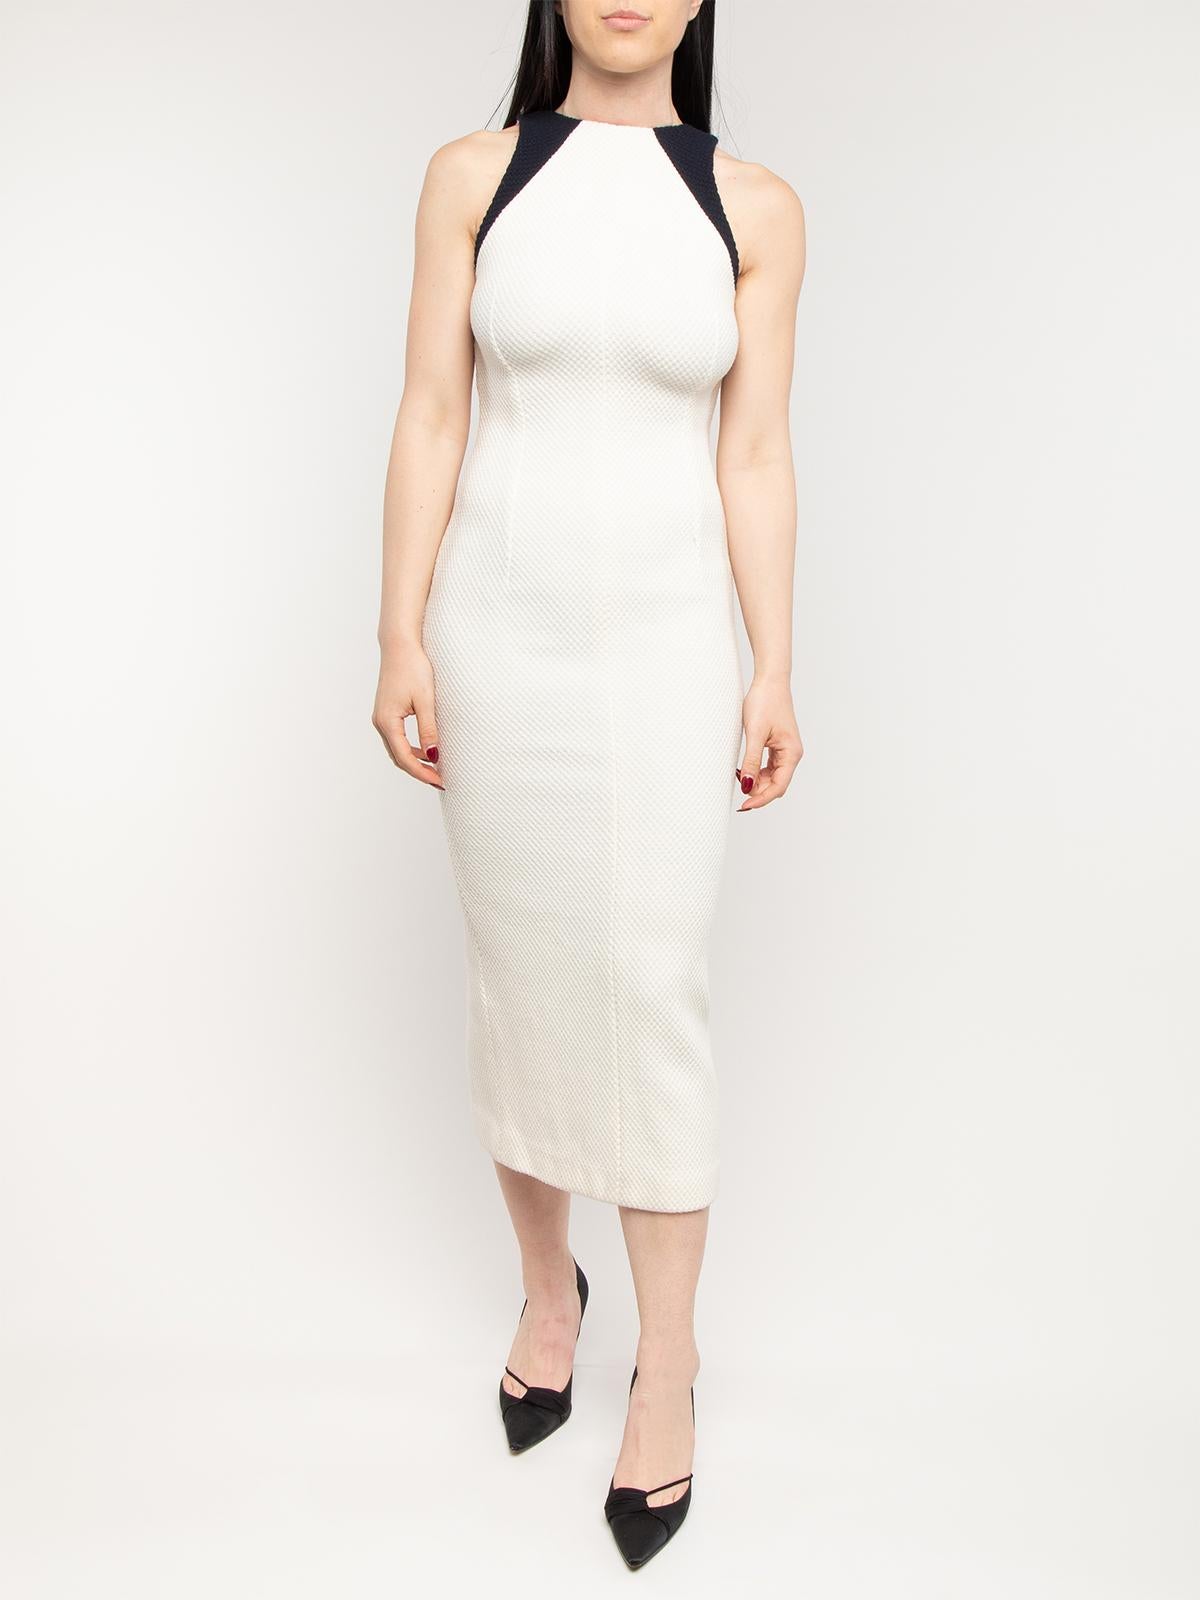 CONDITION is Good. Some wear and pilling to dress is evident. Some stains and discoloration to hemline on this used Victoria Beckham designer resale item. Details Cream & Navy blue Cotton Midi cut with slit on front Regular fit Sleeveless V neckline